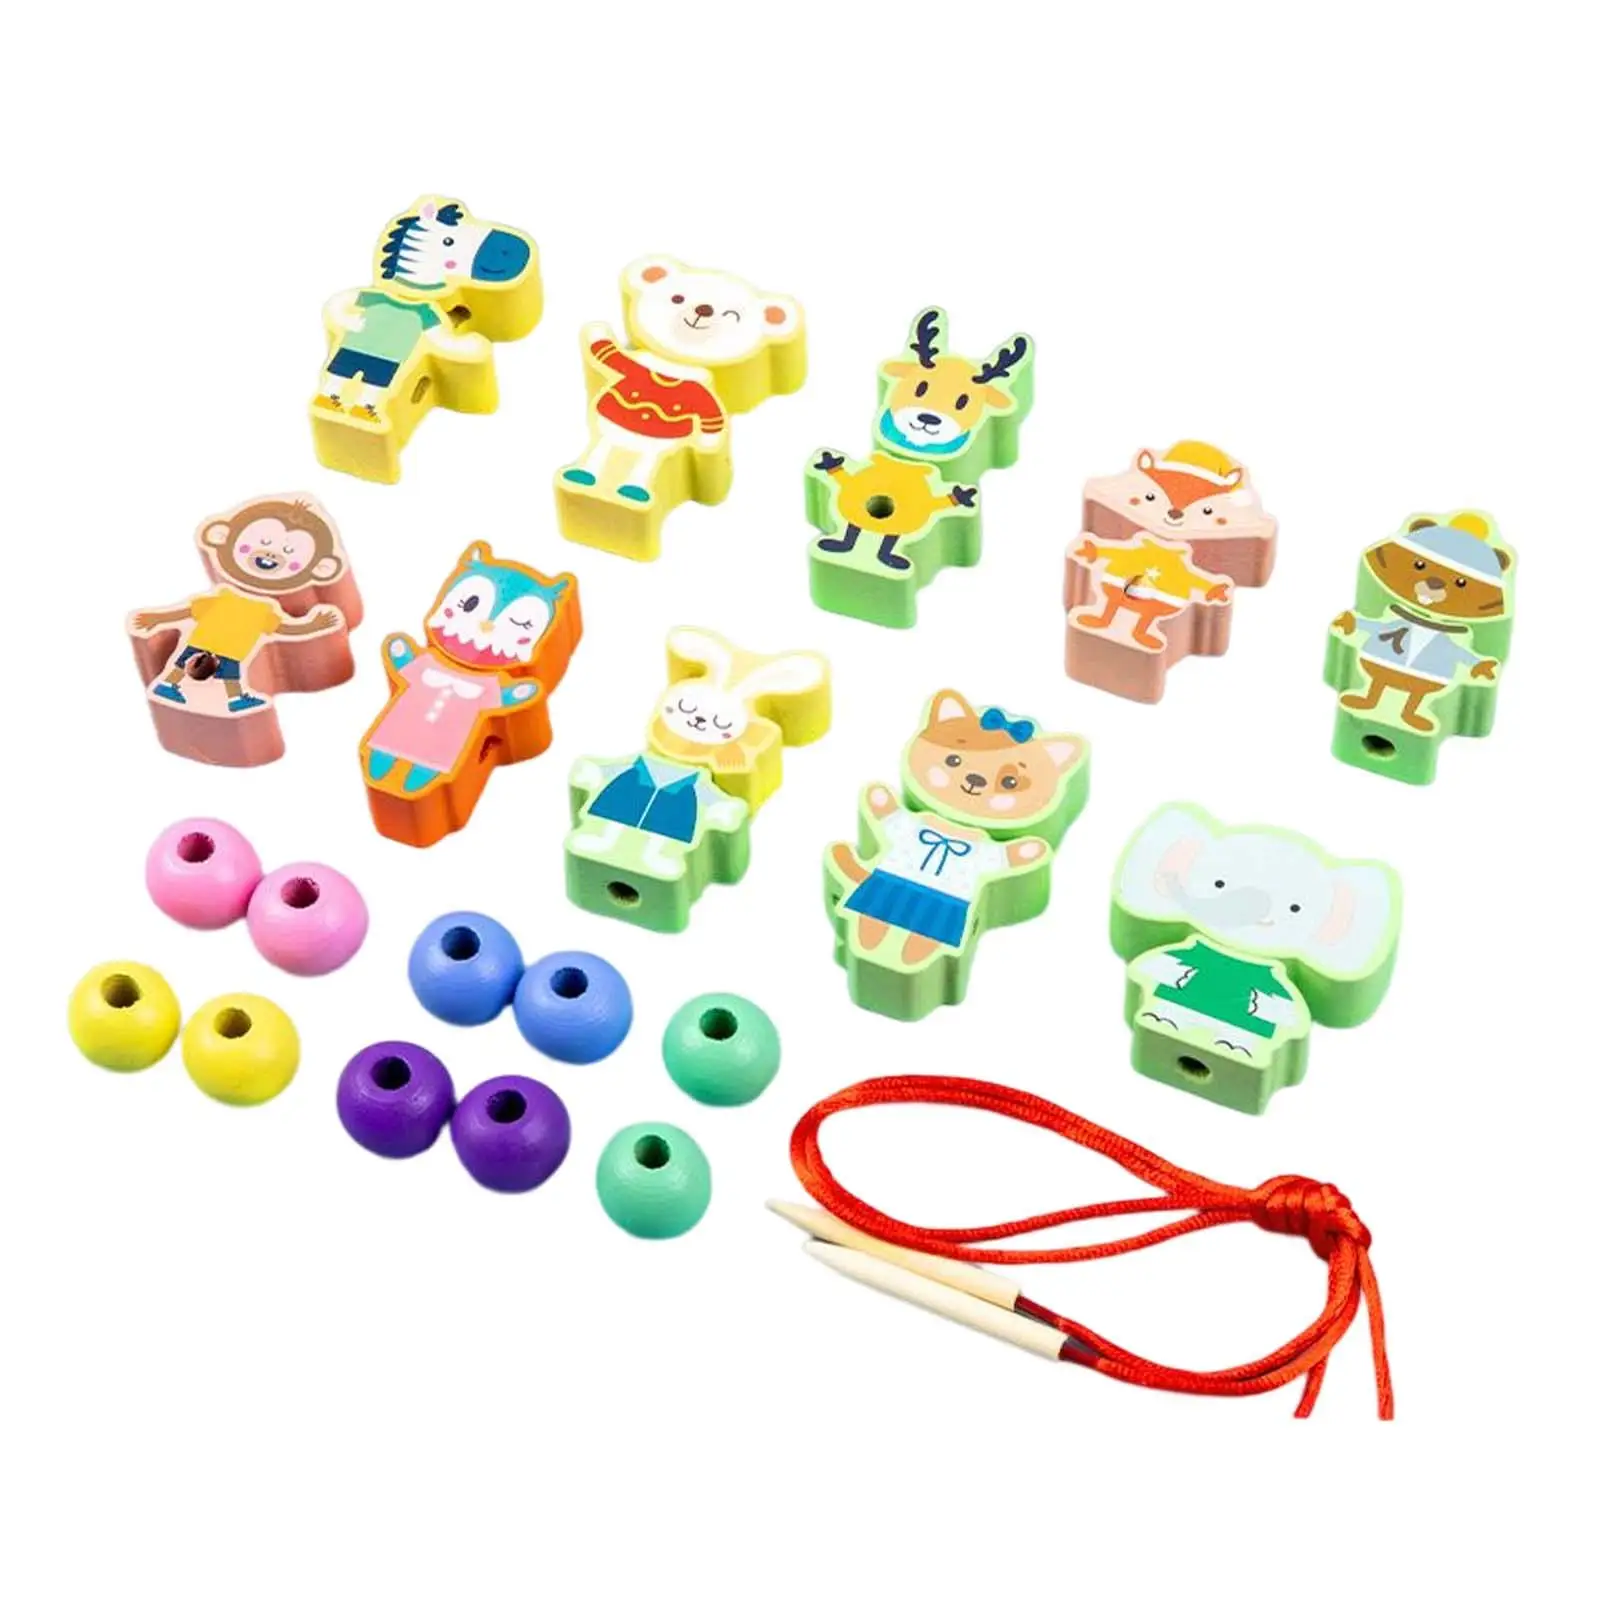 Wooden Threading Toys Early Educational Toys Wooden Crafts Preschool 3 Year Old Kids Boys Girls Lacing Beads Set for Kids Gift